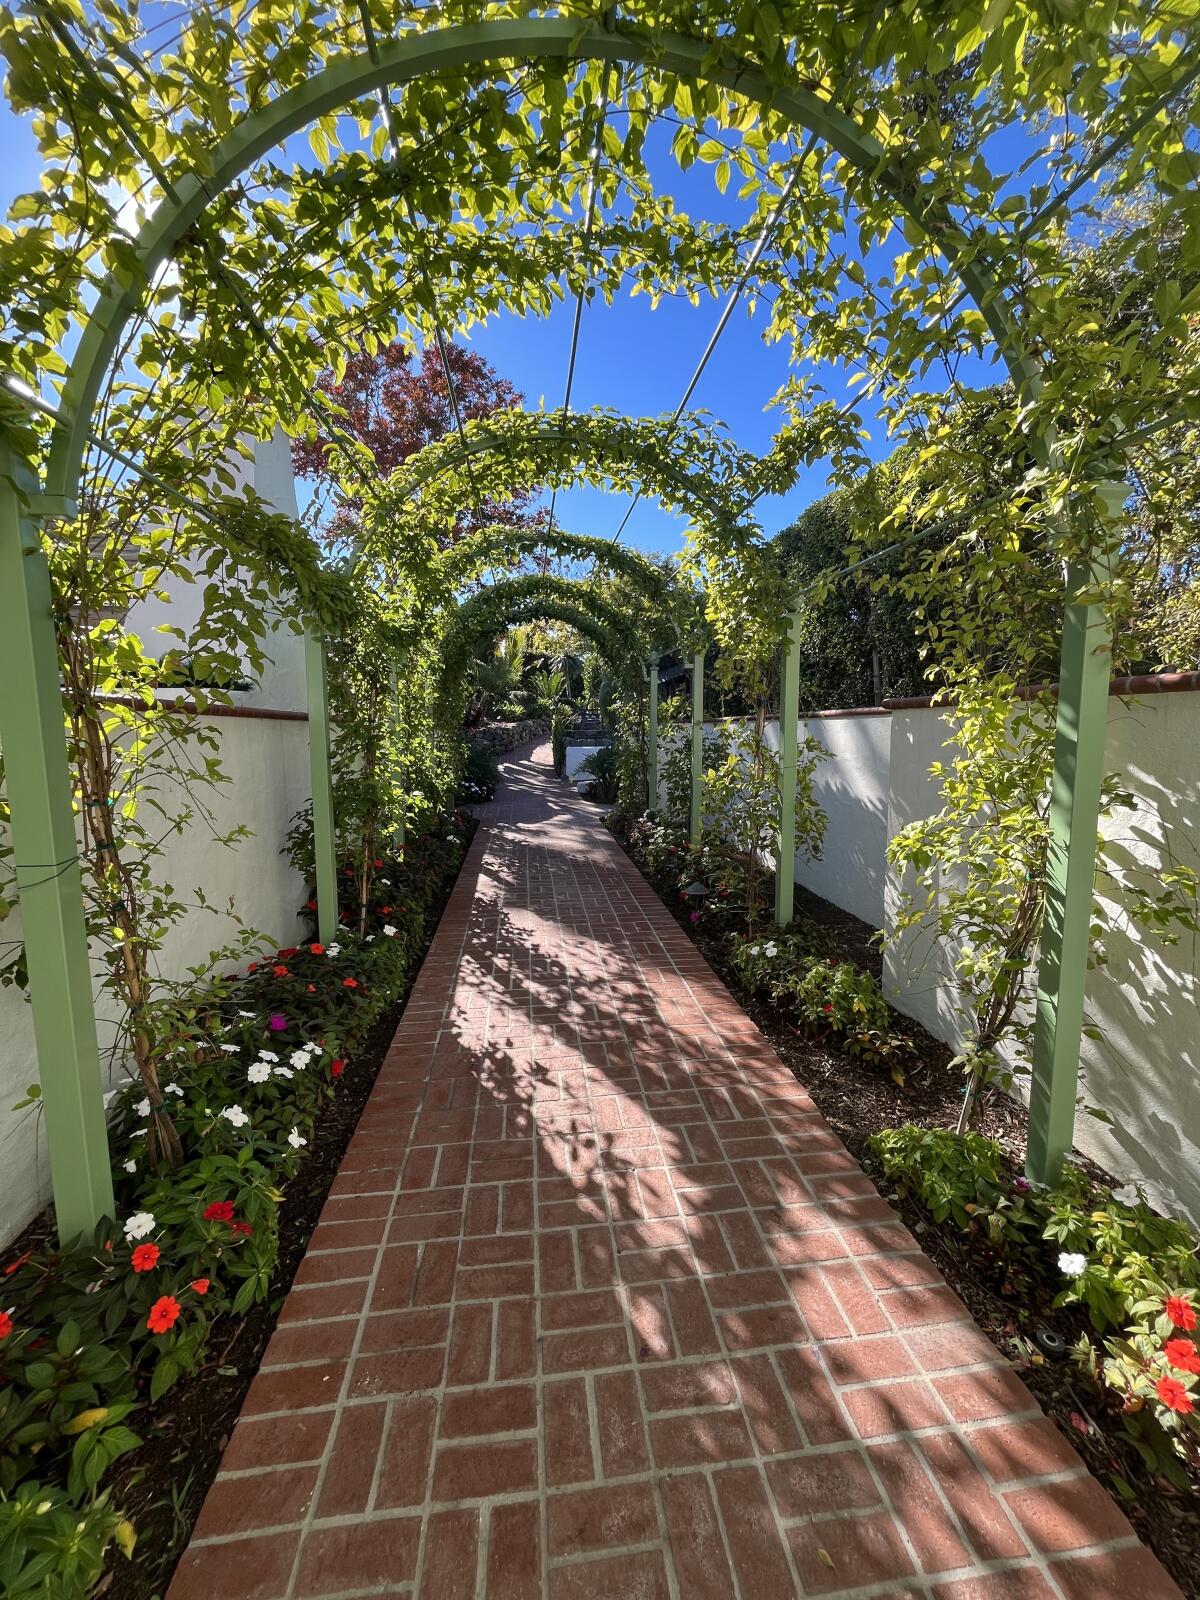 The Inn's landscaping includes a green archway leading the guest rooms.